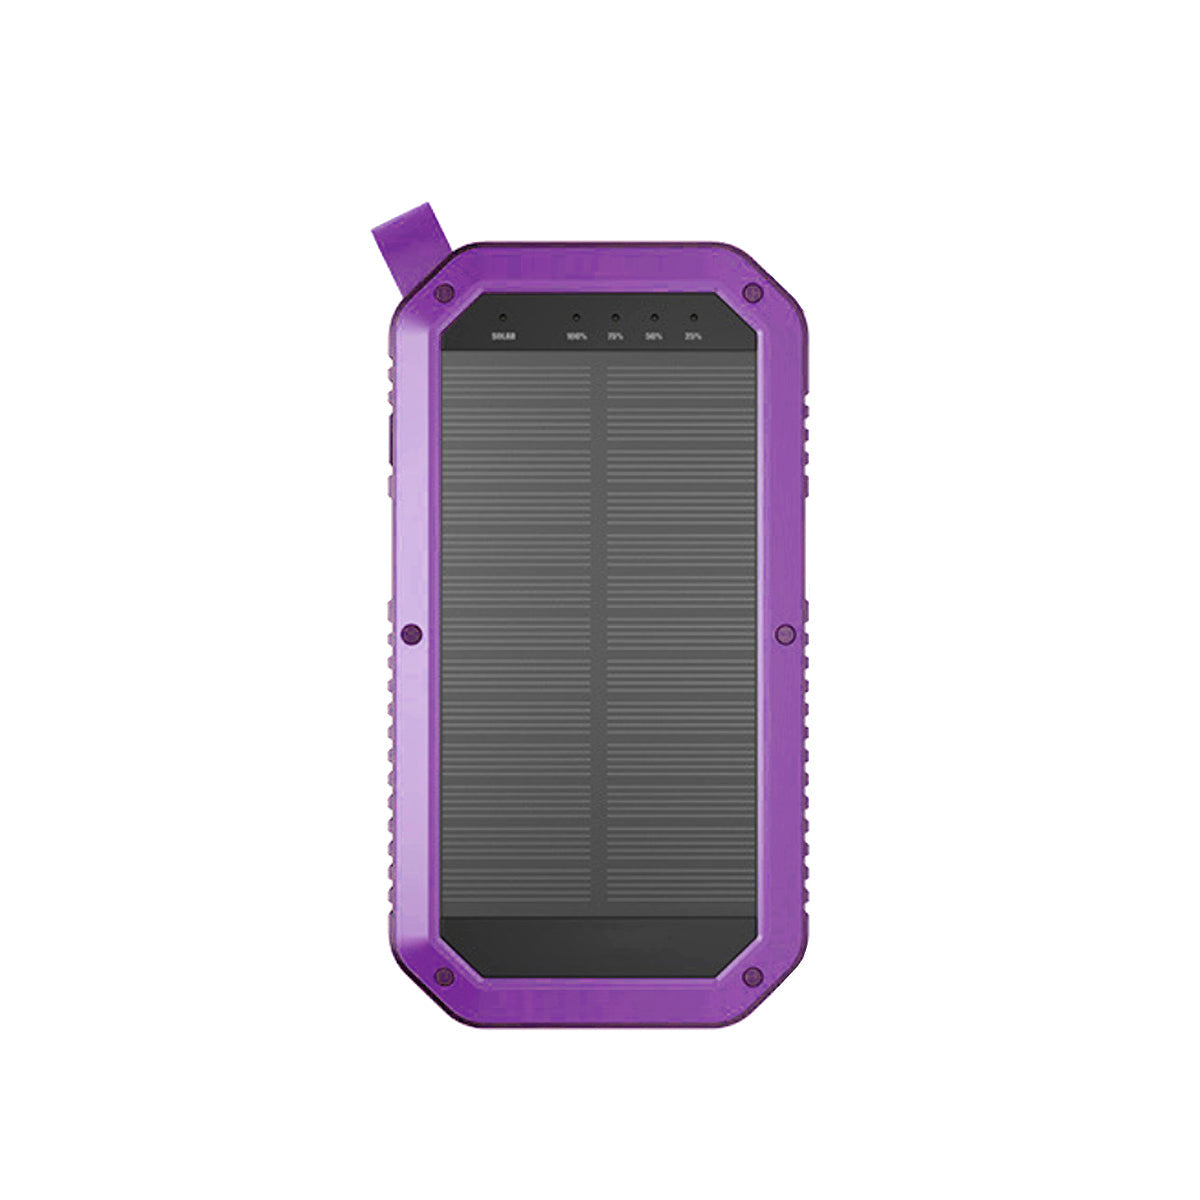 Sun Chaser Mini Solar Powered Wireless Phone Charger 10,000 mAh With LED Flood Light by VistaShops